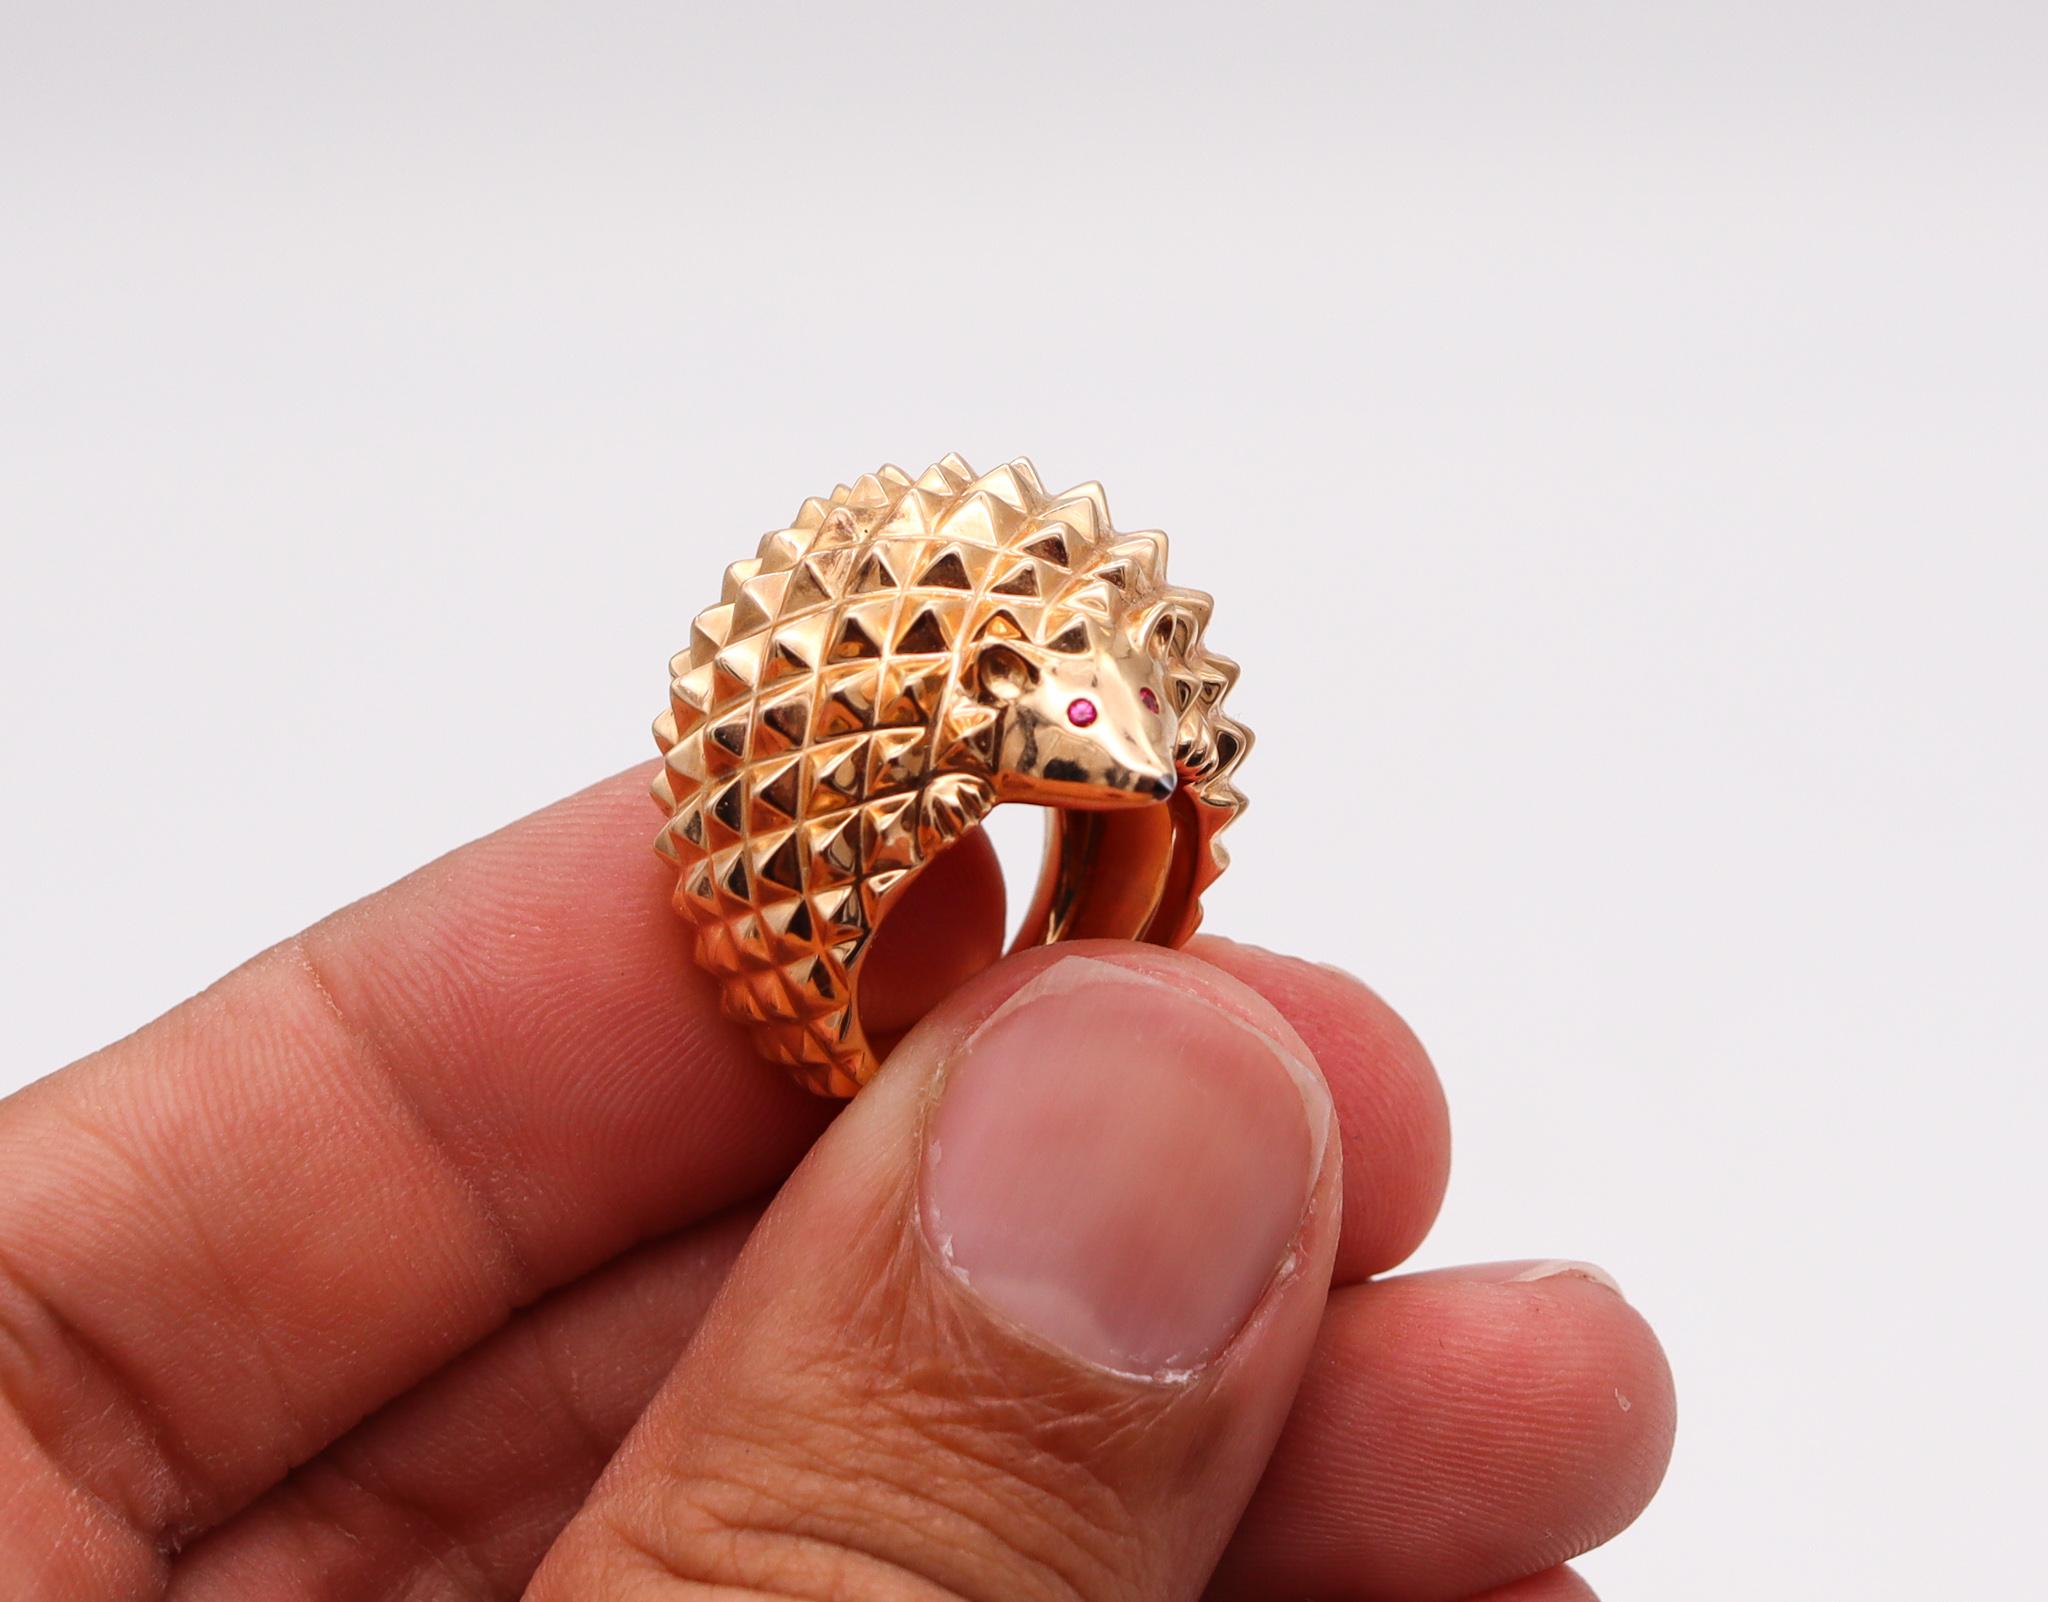 A porcupine ring designed by Boucheron.

Stunning modernist piece, created in Paris France by the jewelry house of Boucheron. The model of Hans, The Hedgehog ring is very rare and popular. This three-dimensional cocktail ring was carefully crafted